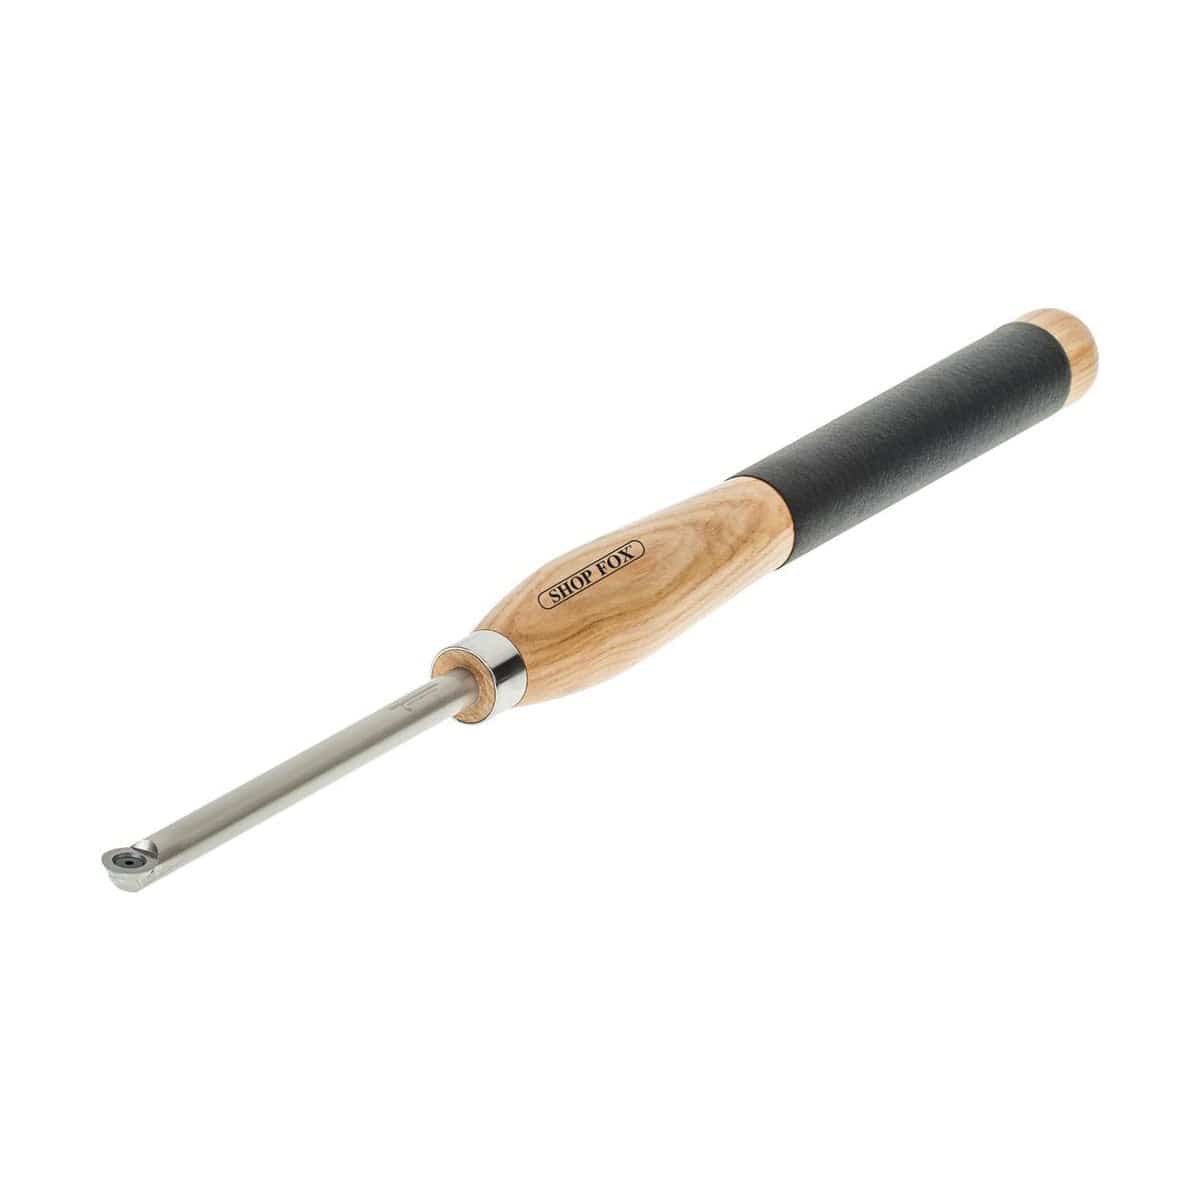 Shop Fox D4872 Lathe Accessory Carbide Tipped Lathe Chisel - Round/Finisher